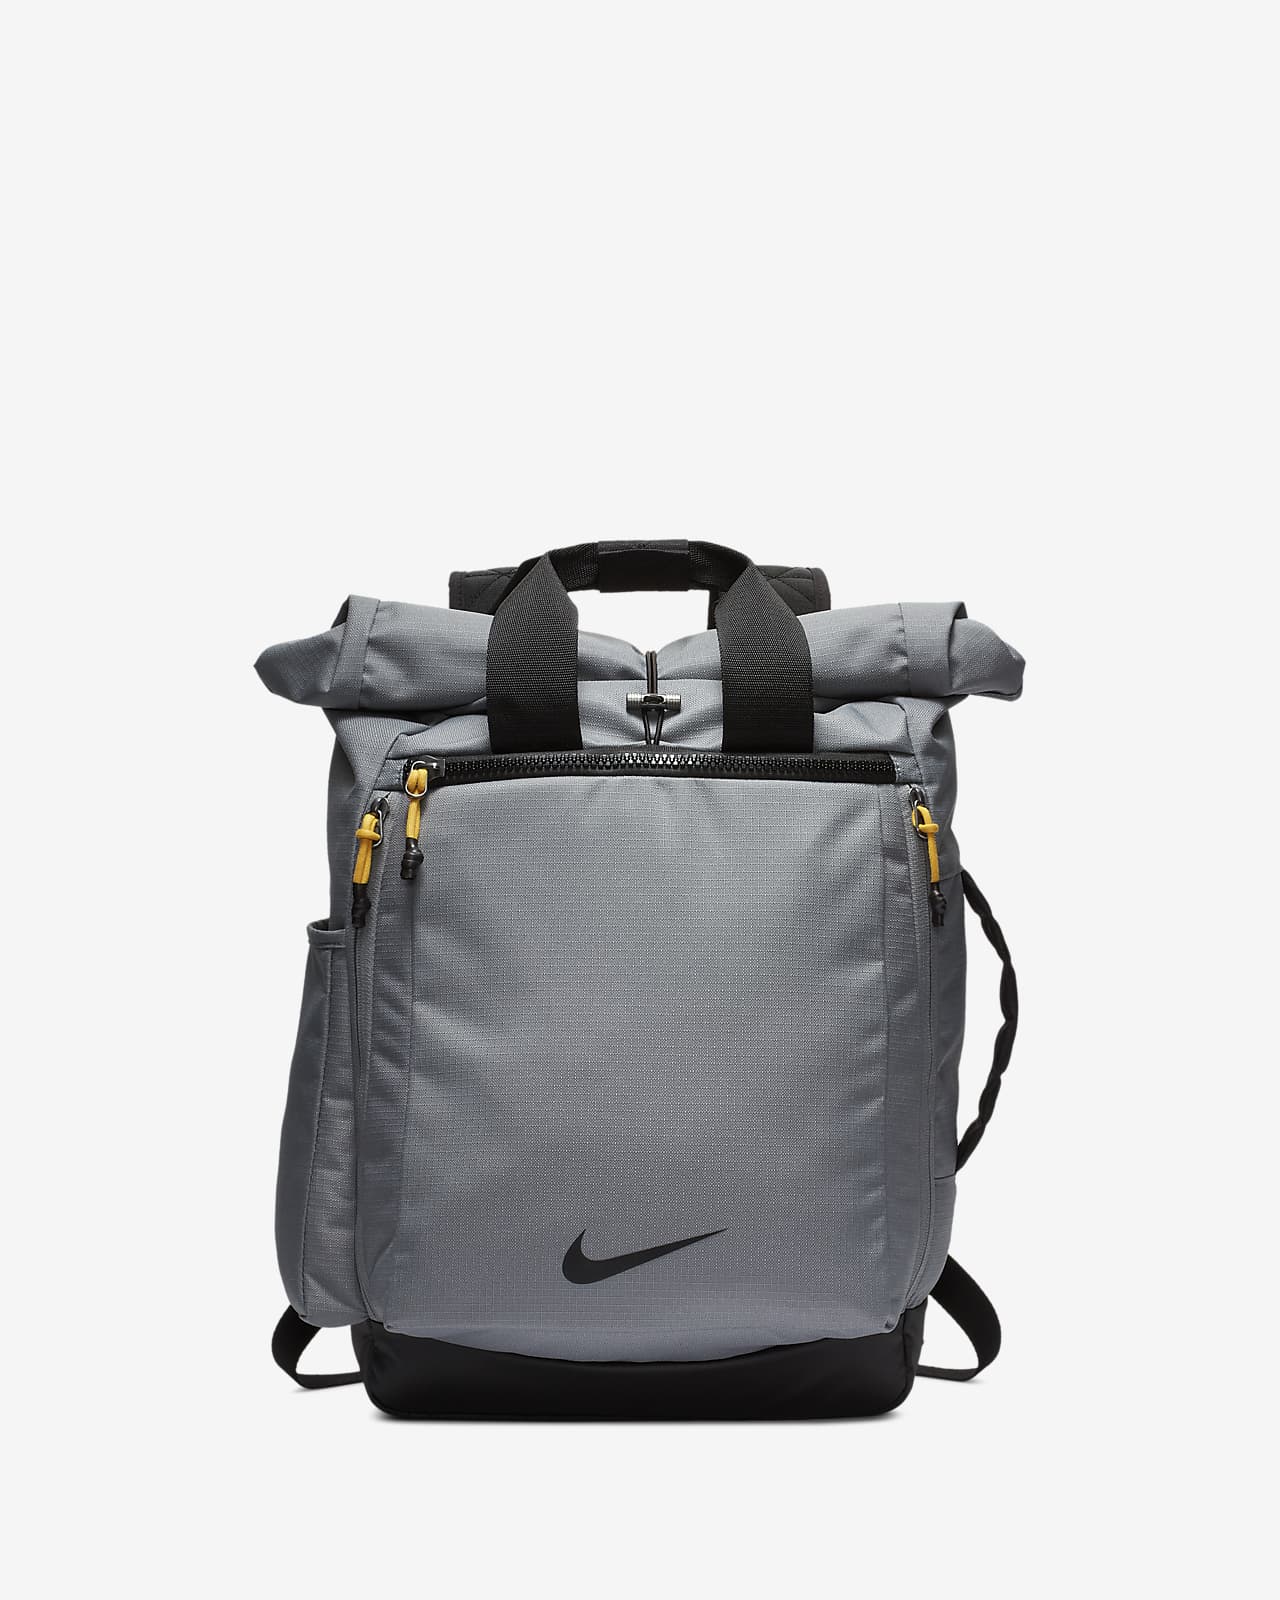 nike sport golf backpack review